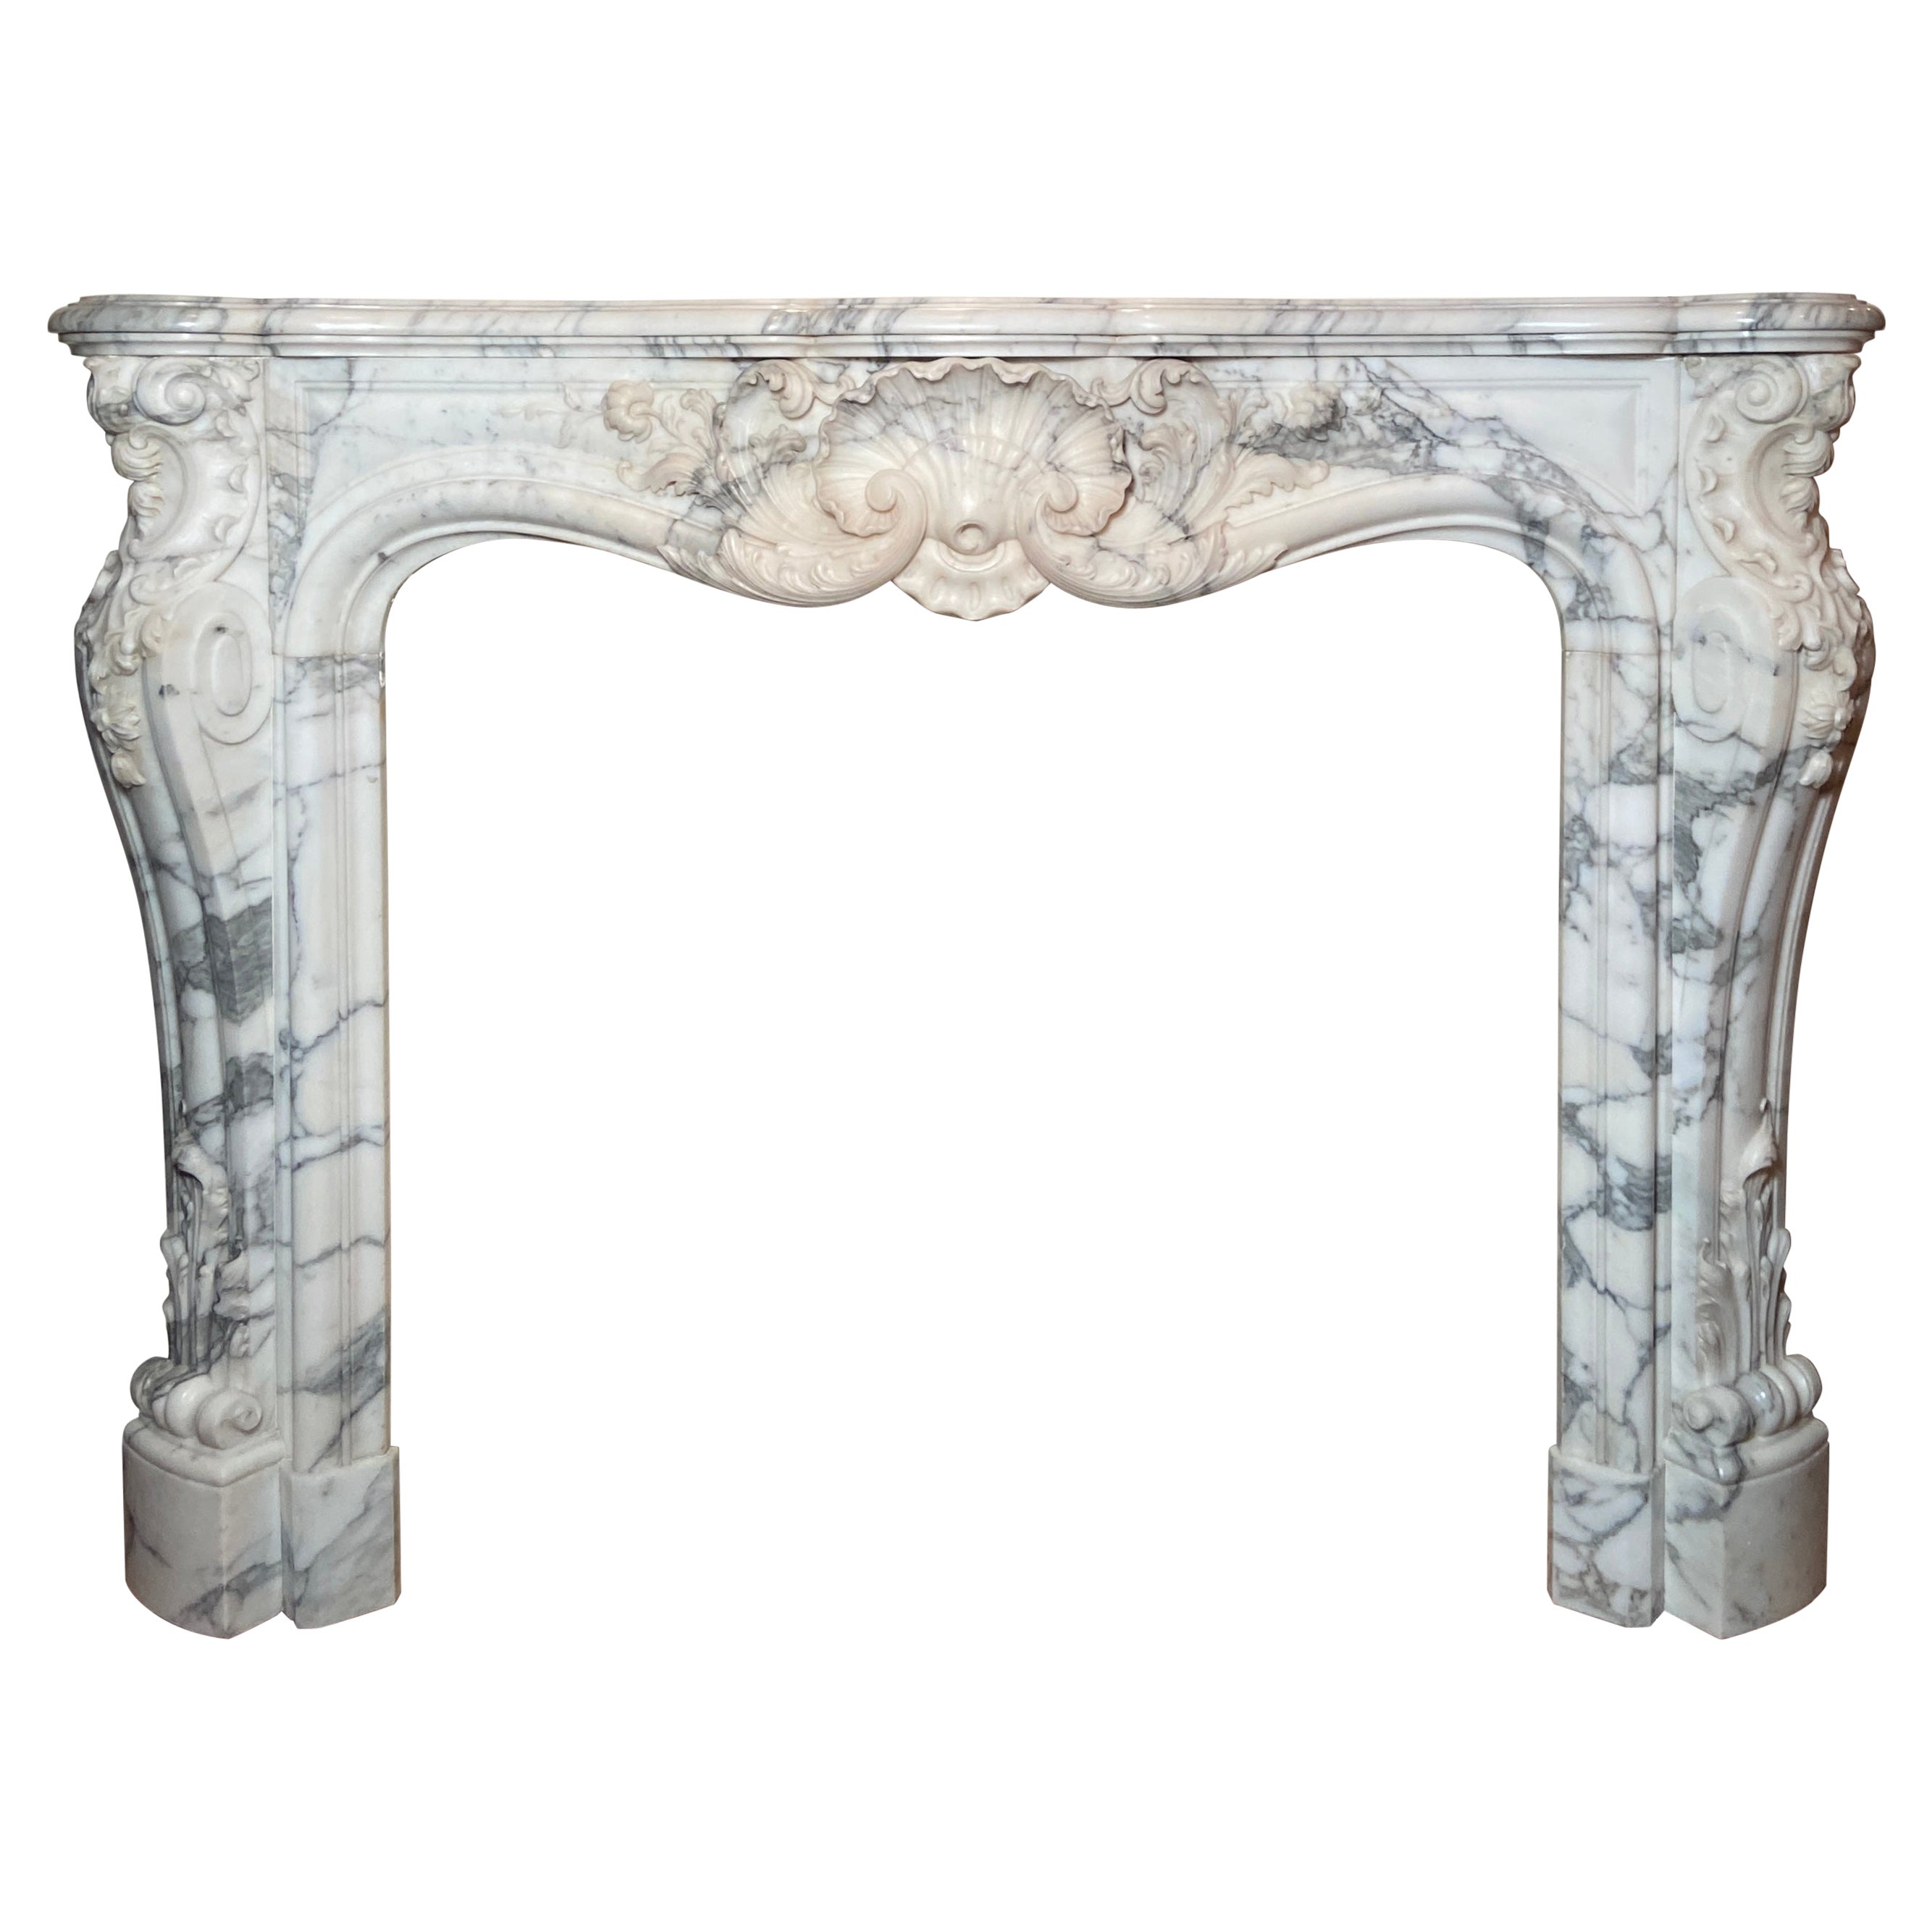 Antique 18th Century French Richly Sculpted Marble Mantelpiece